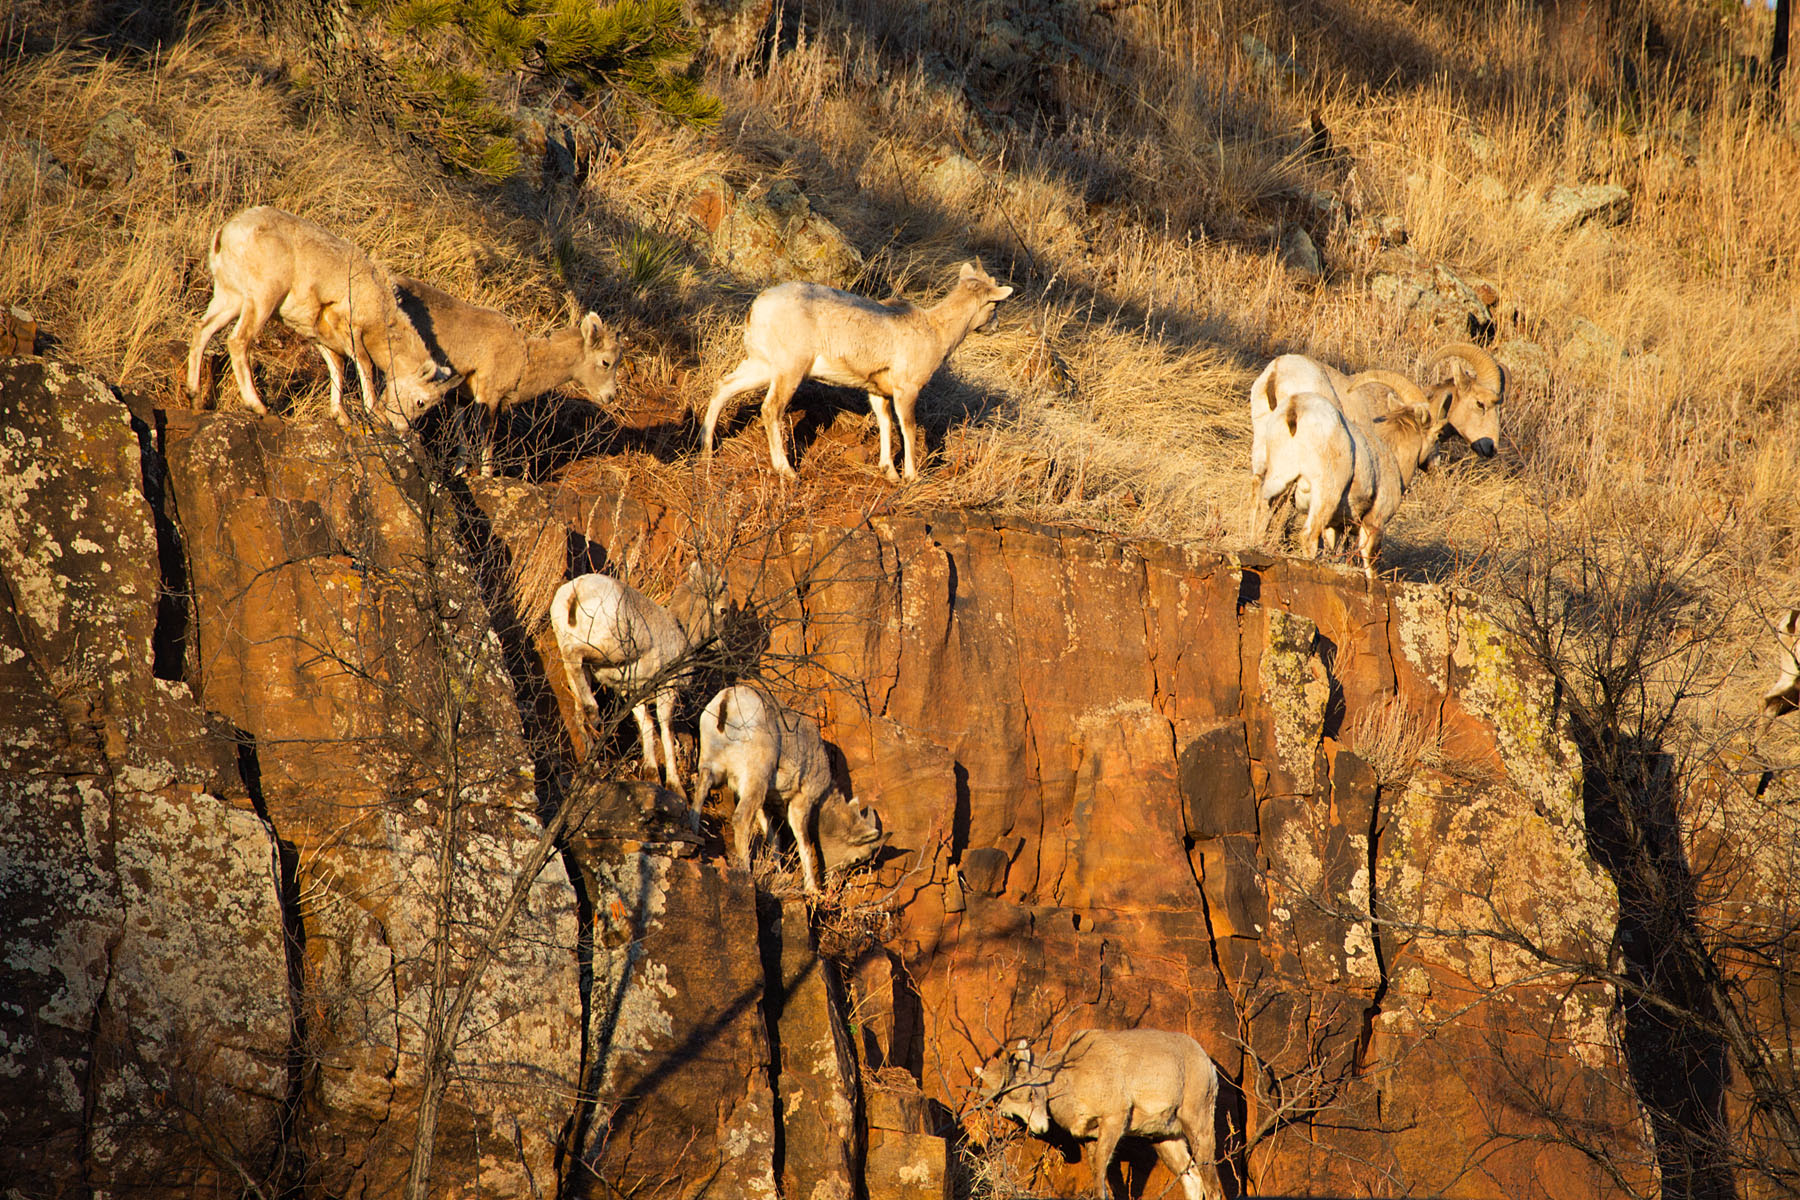 Bighorns on the rocks above Custer State Park Visitor Center.  Click for next photo.